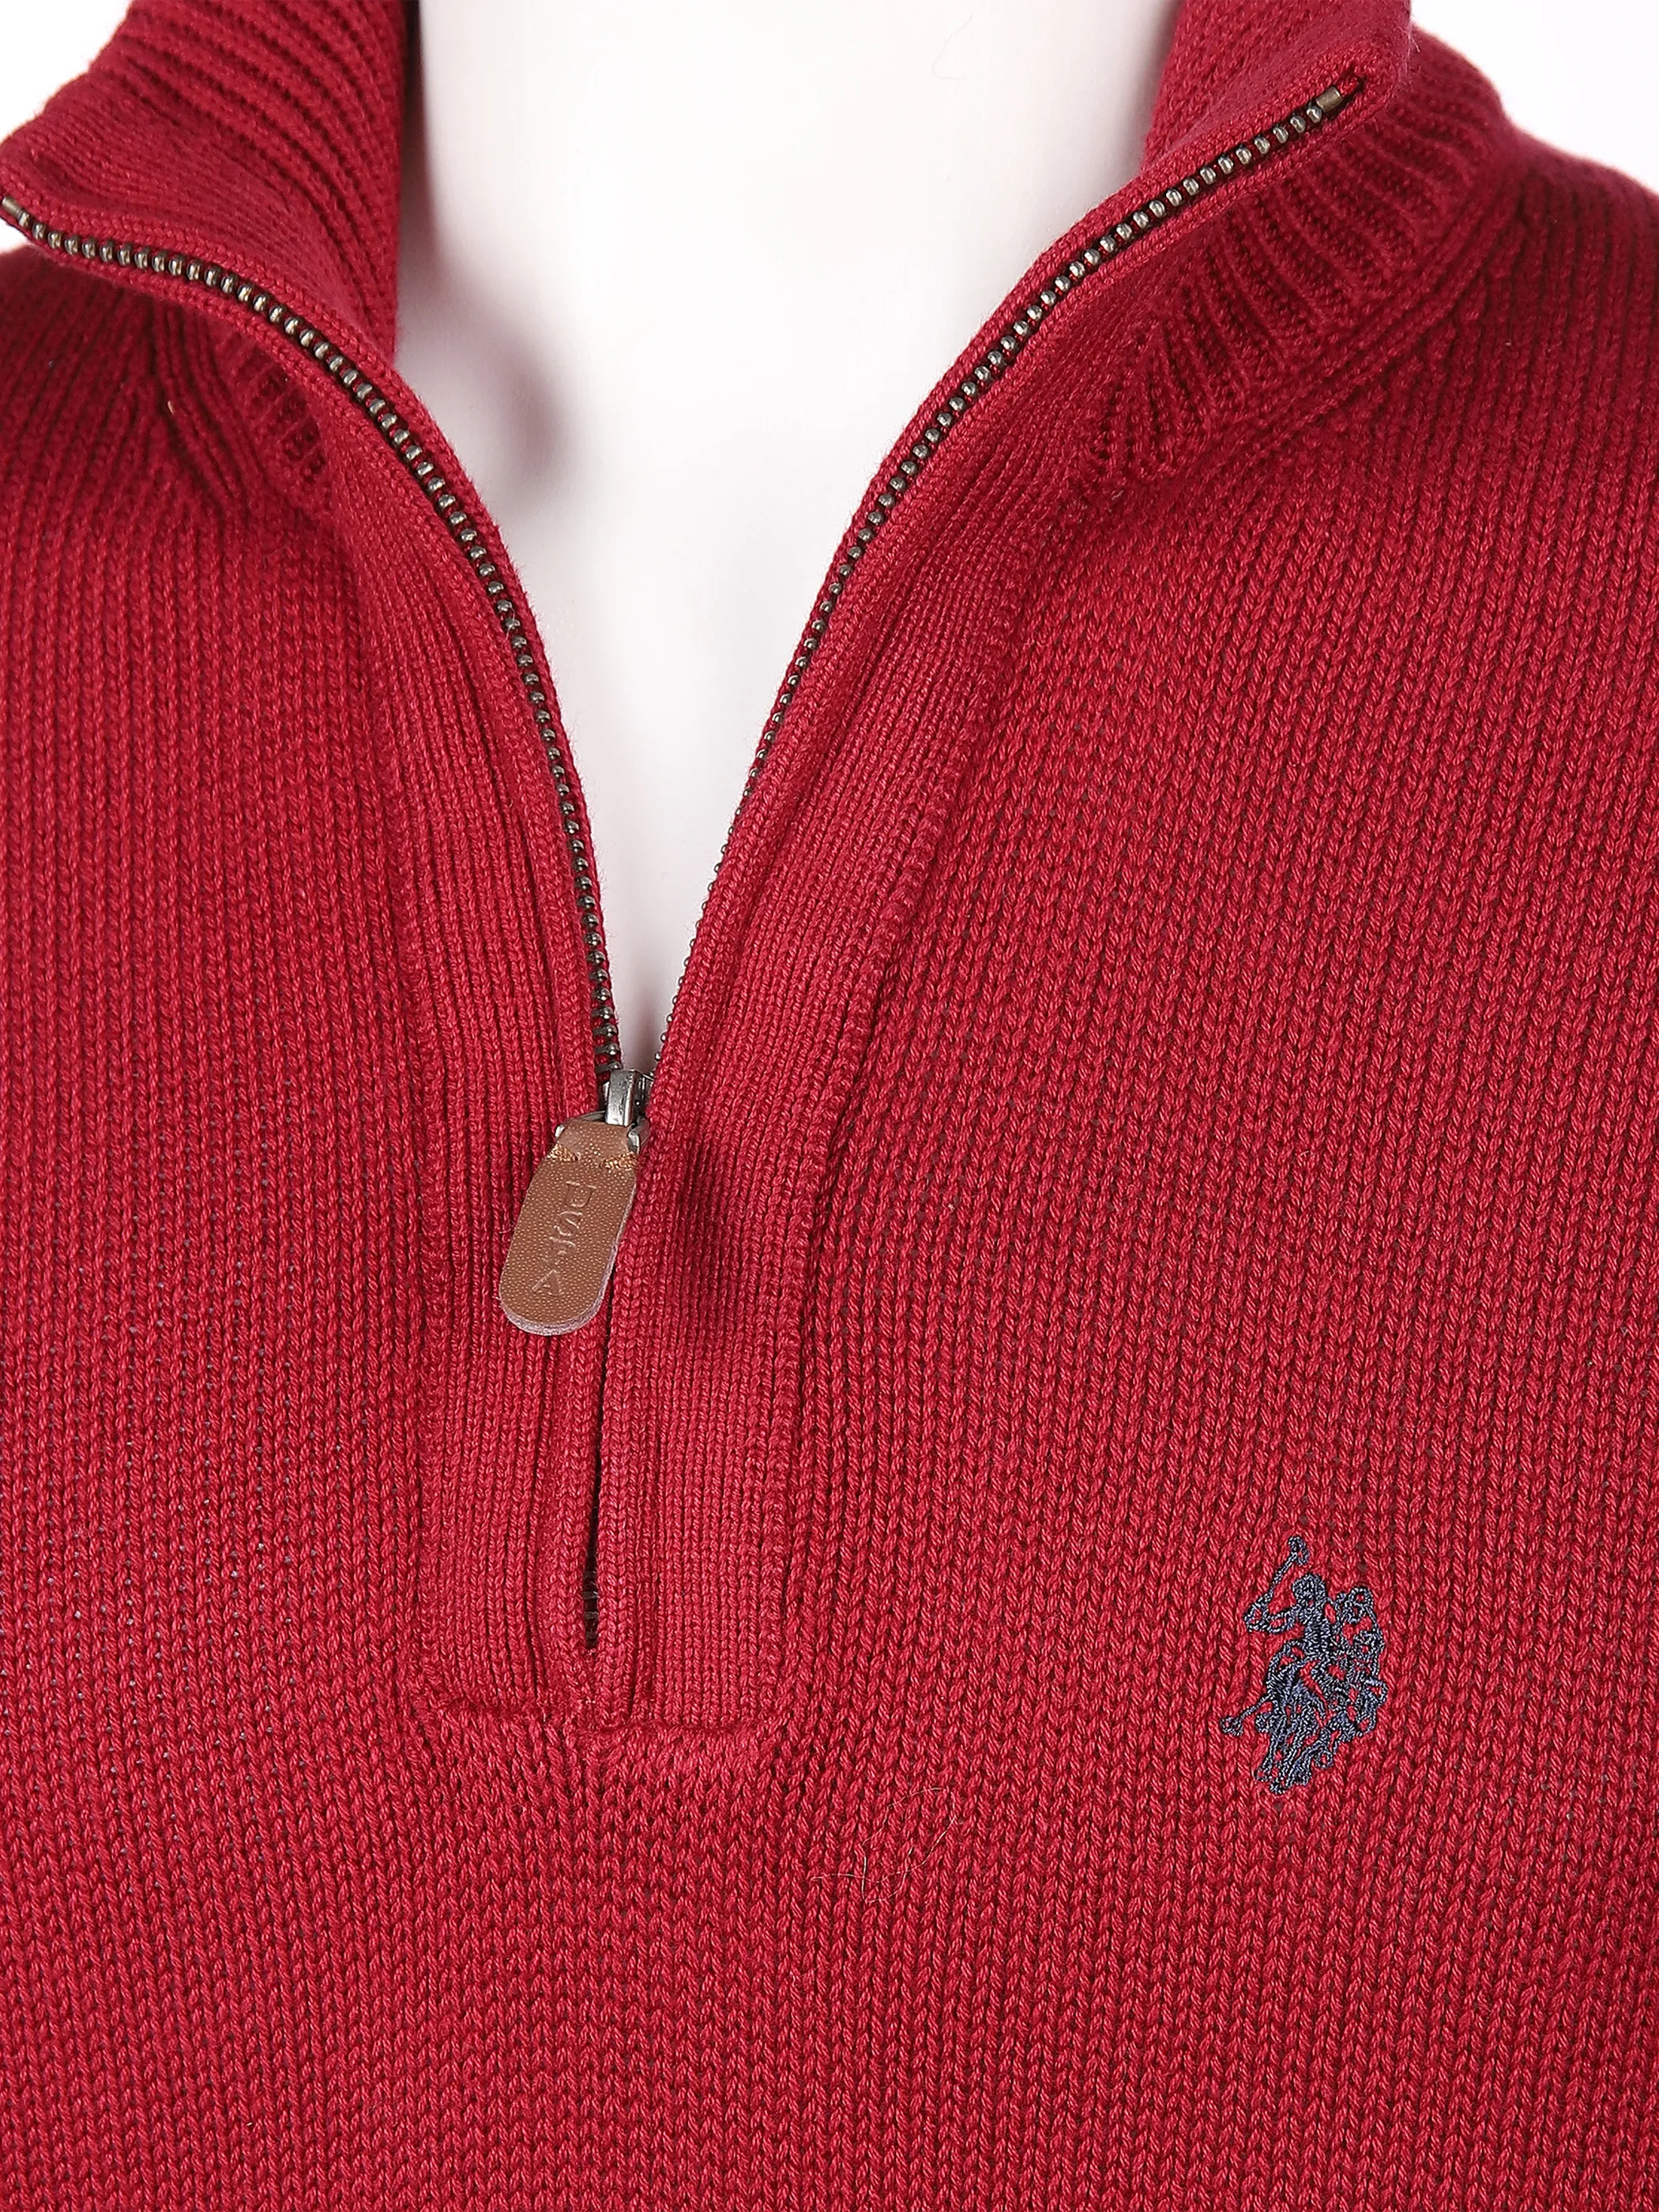 U.S. Polo Assn. He. Stricktroyer RV Rot 844687 DH´ROT 3